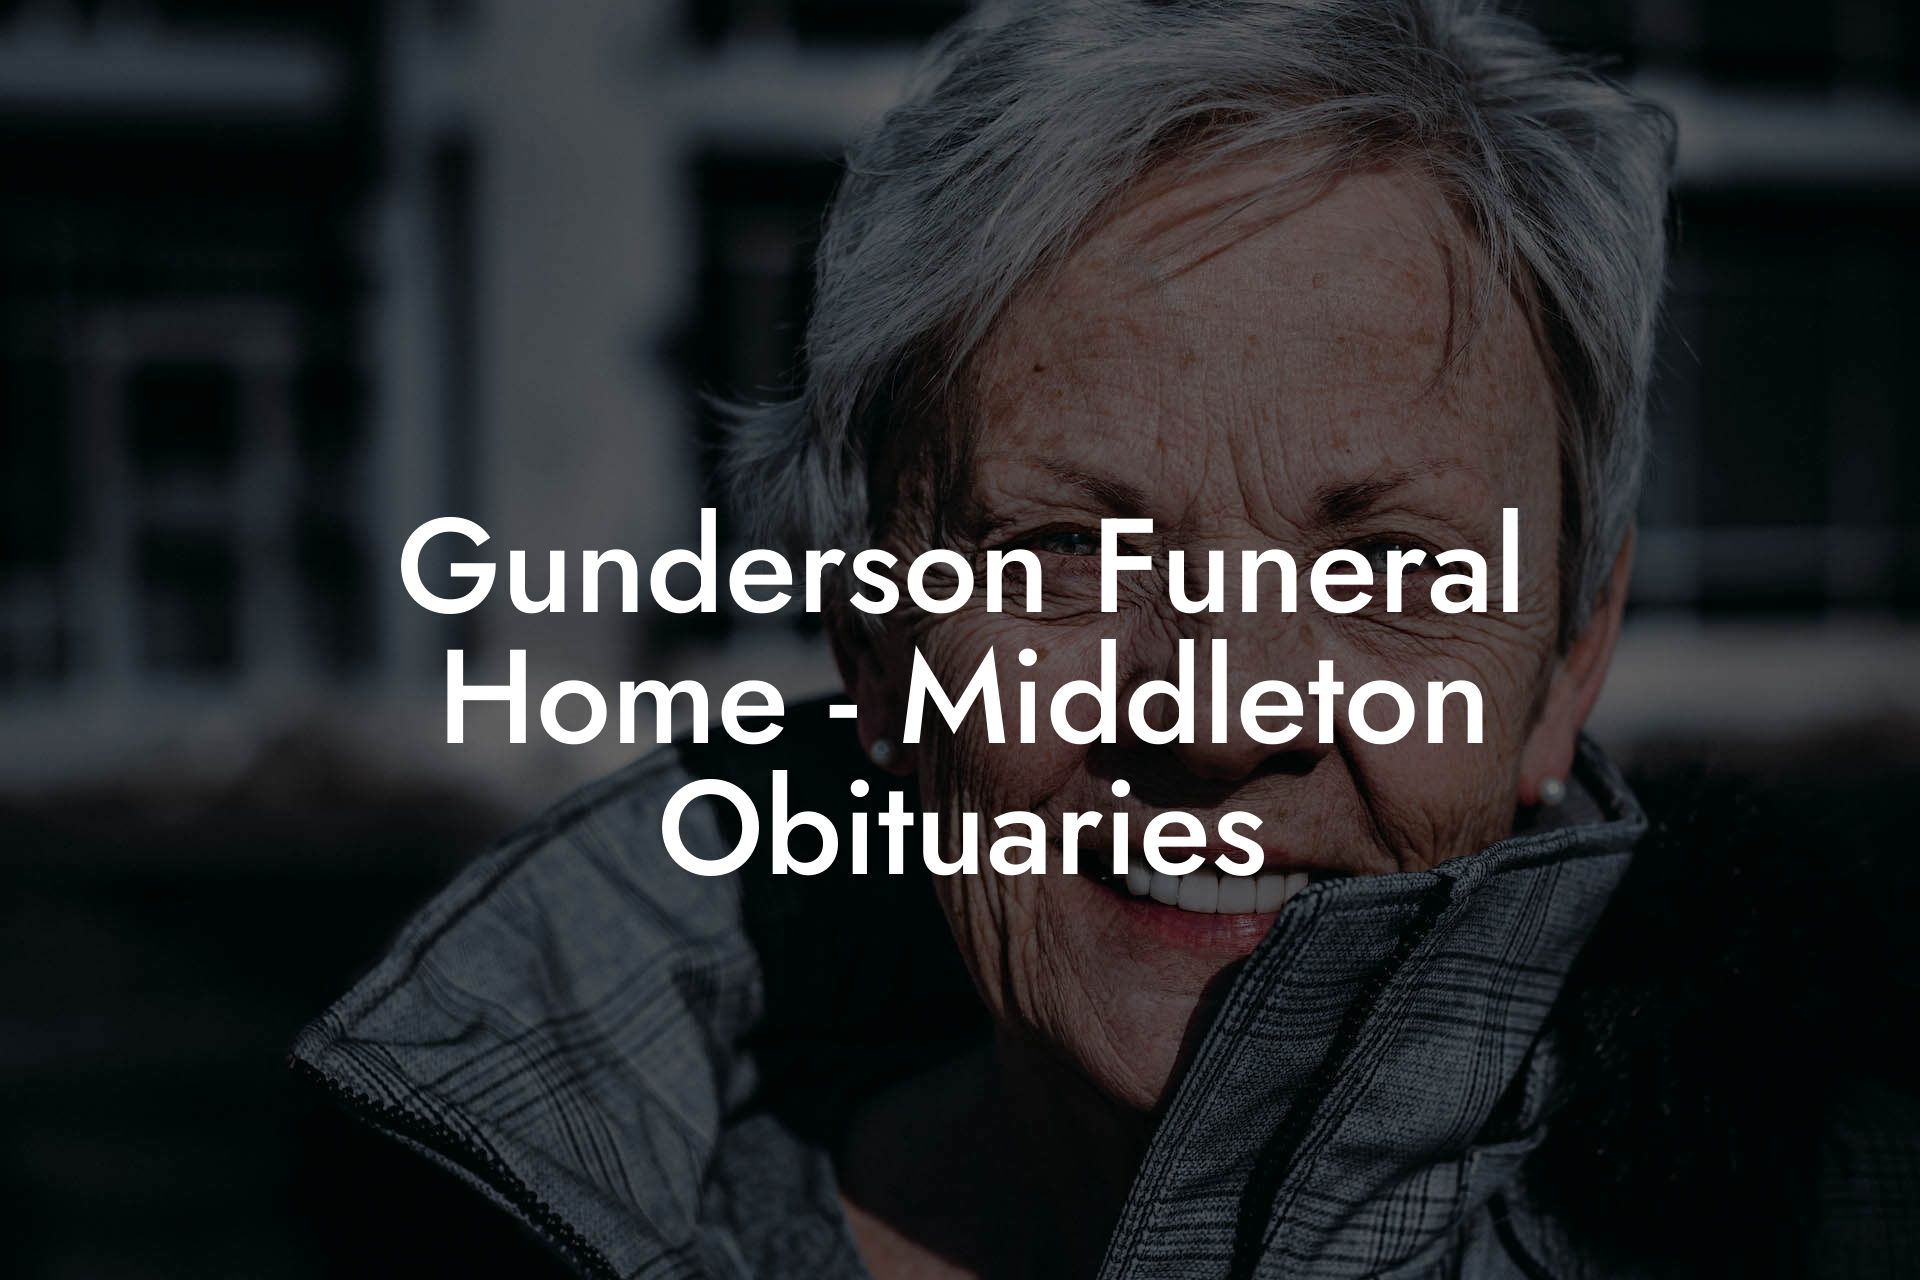 Gunderson Funeral Home - Middleton Obituaries